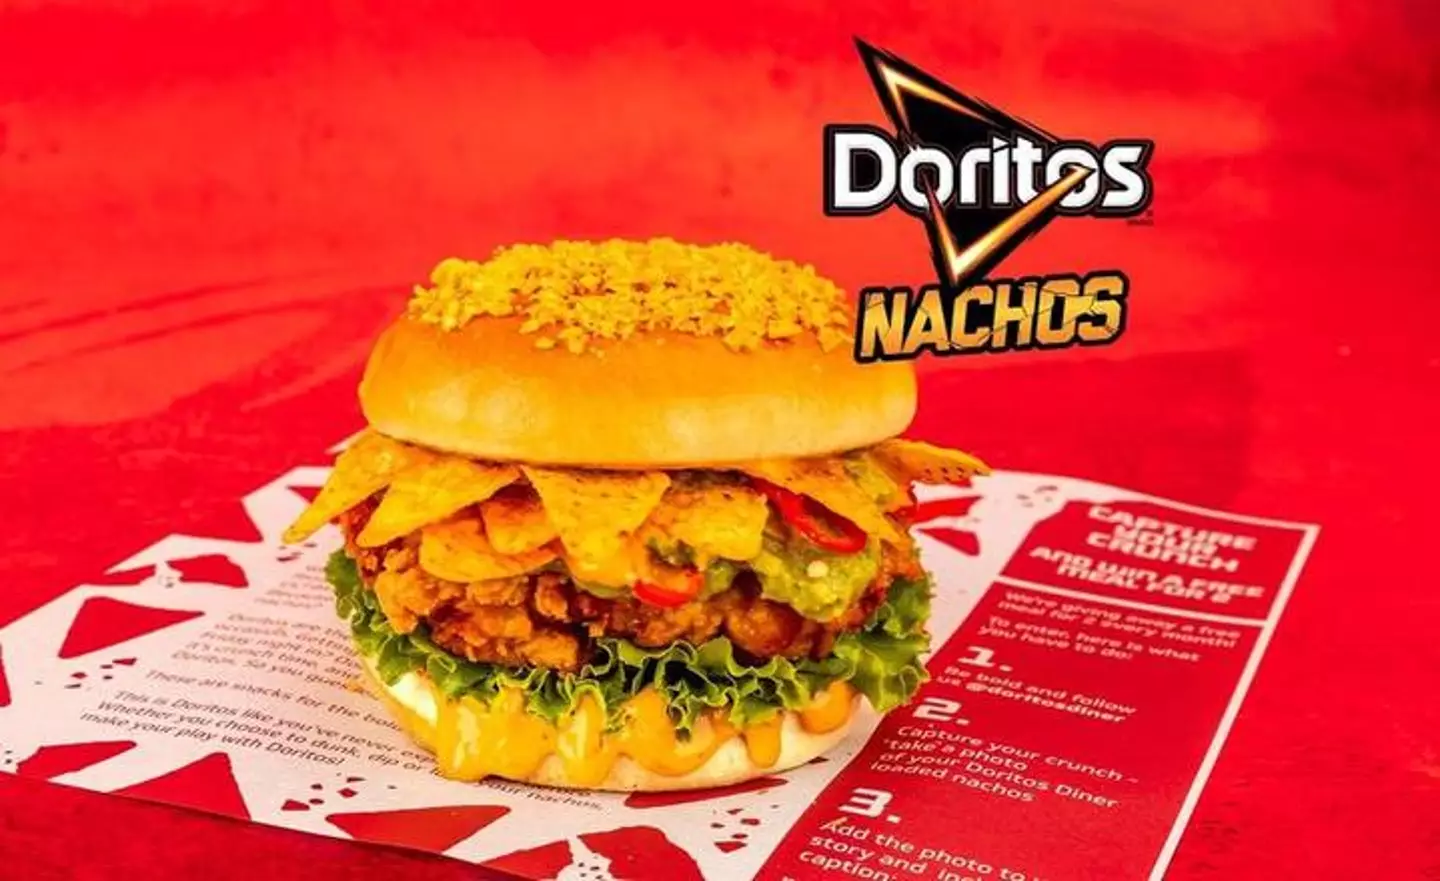 The menu features dishes with the Doritos experience  (